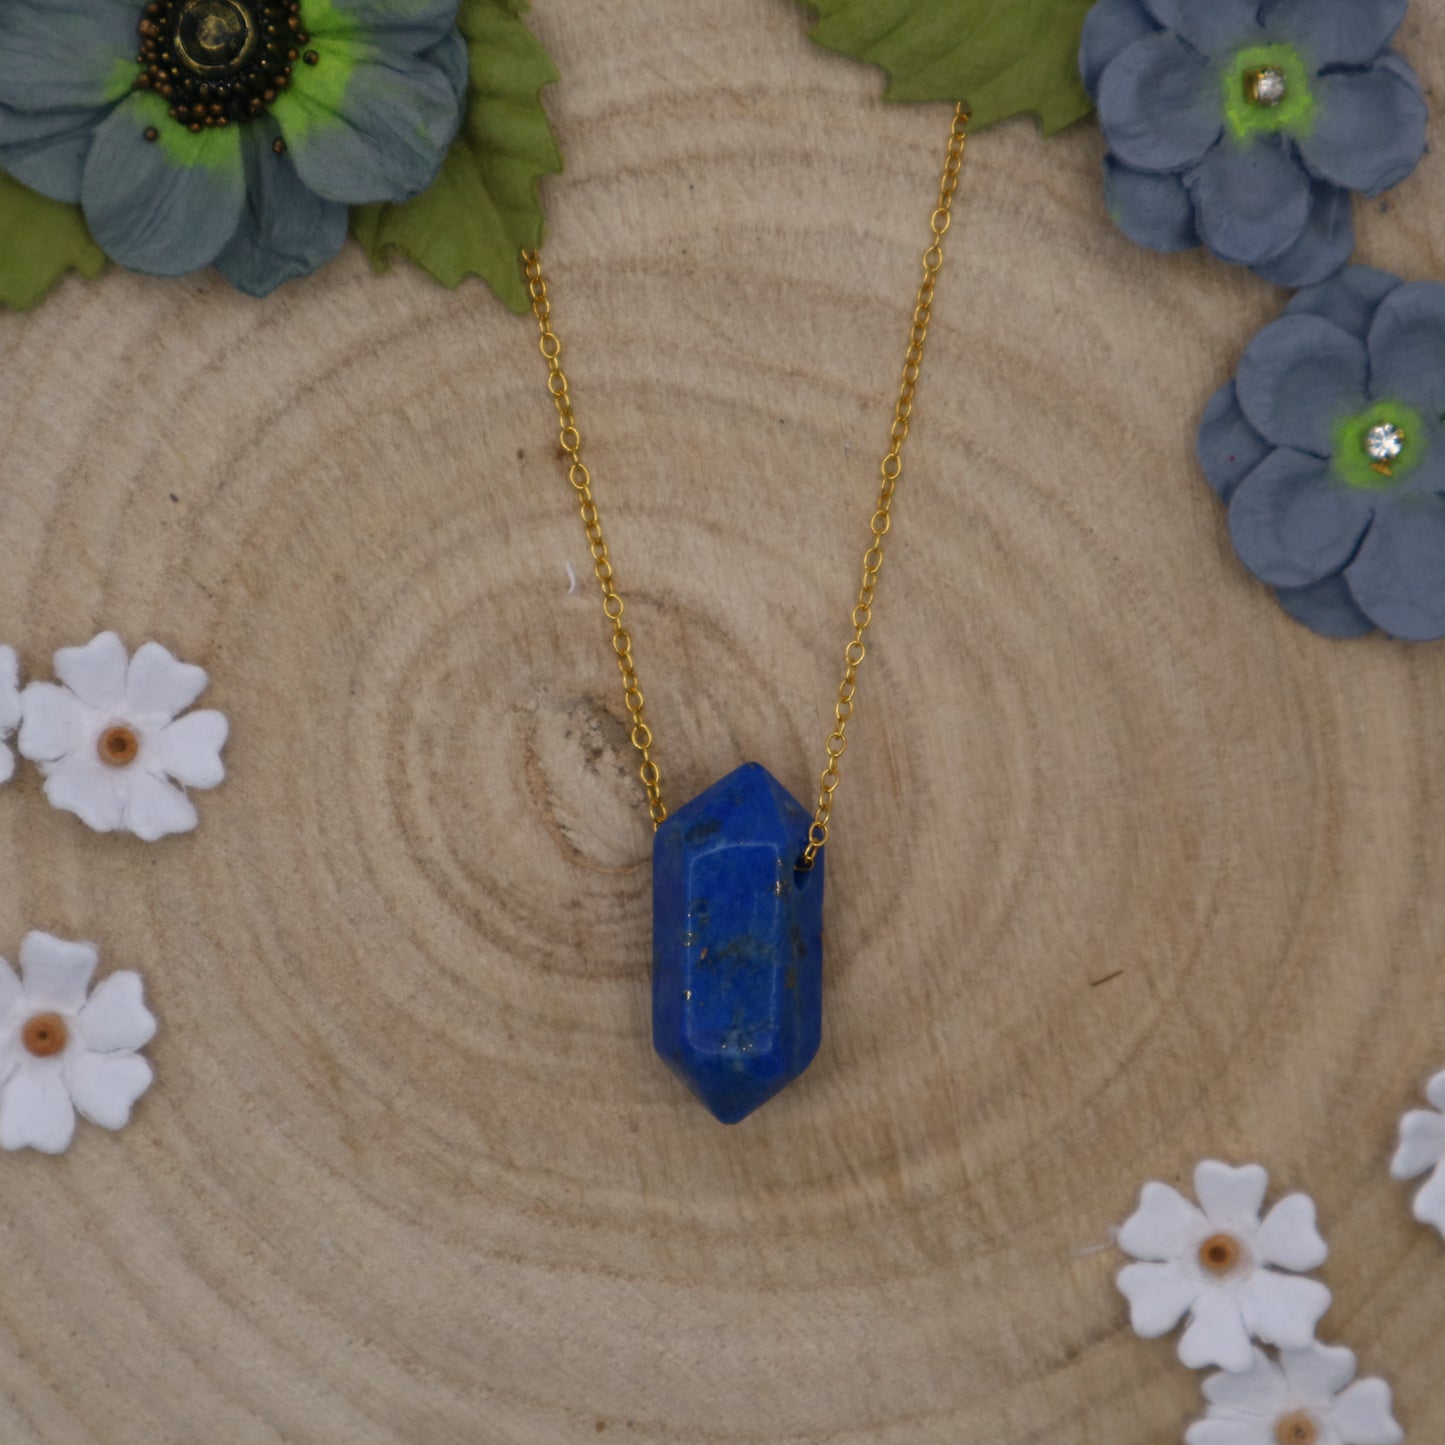 Small Lapis Lazuli crystal on gold fine necklace chain